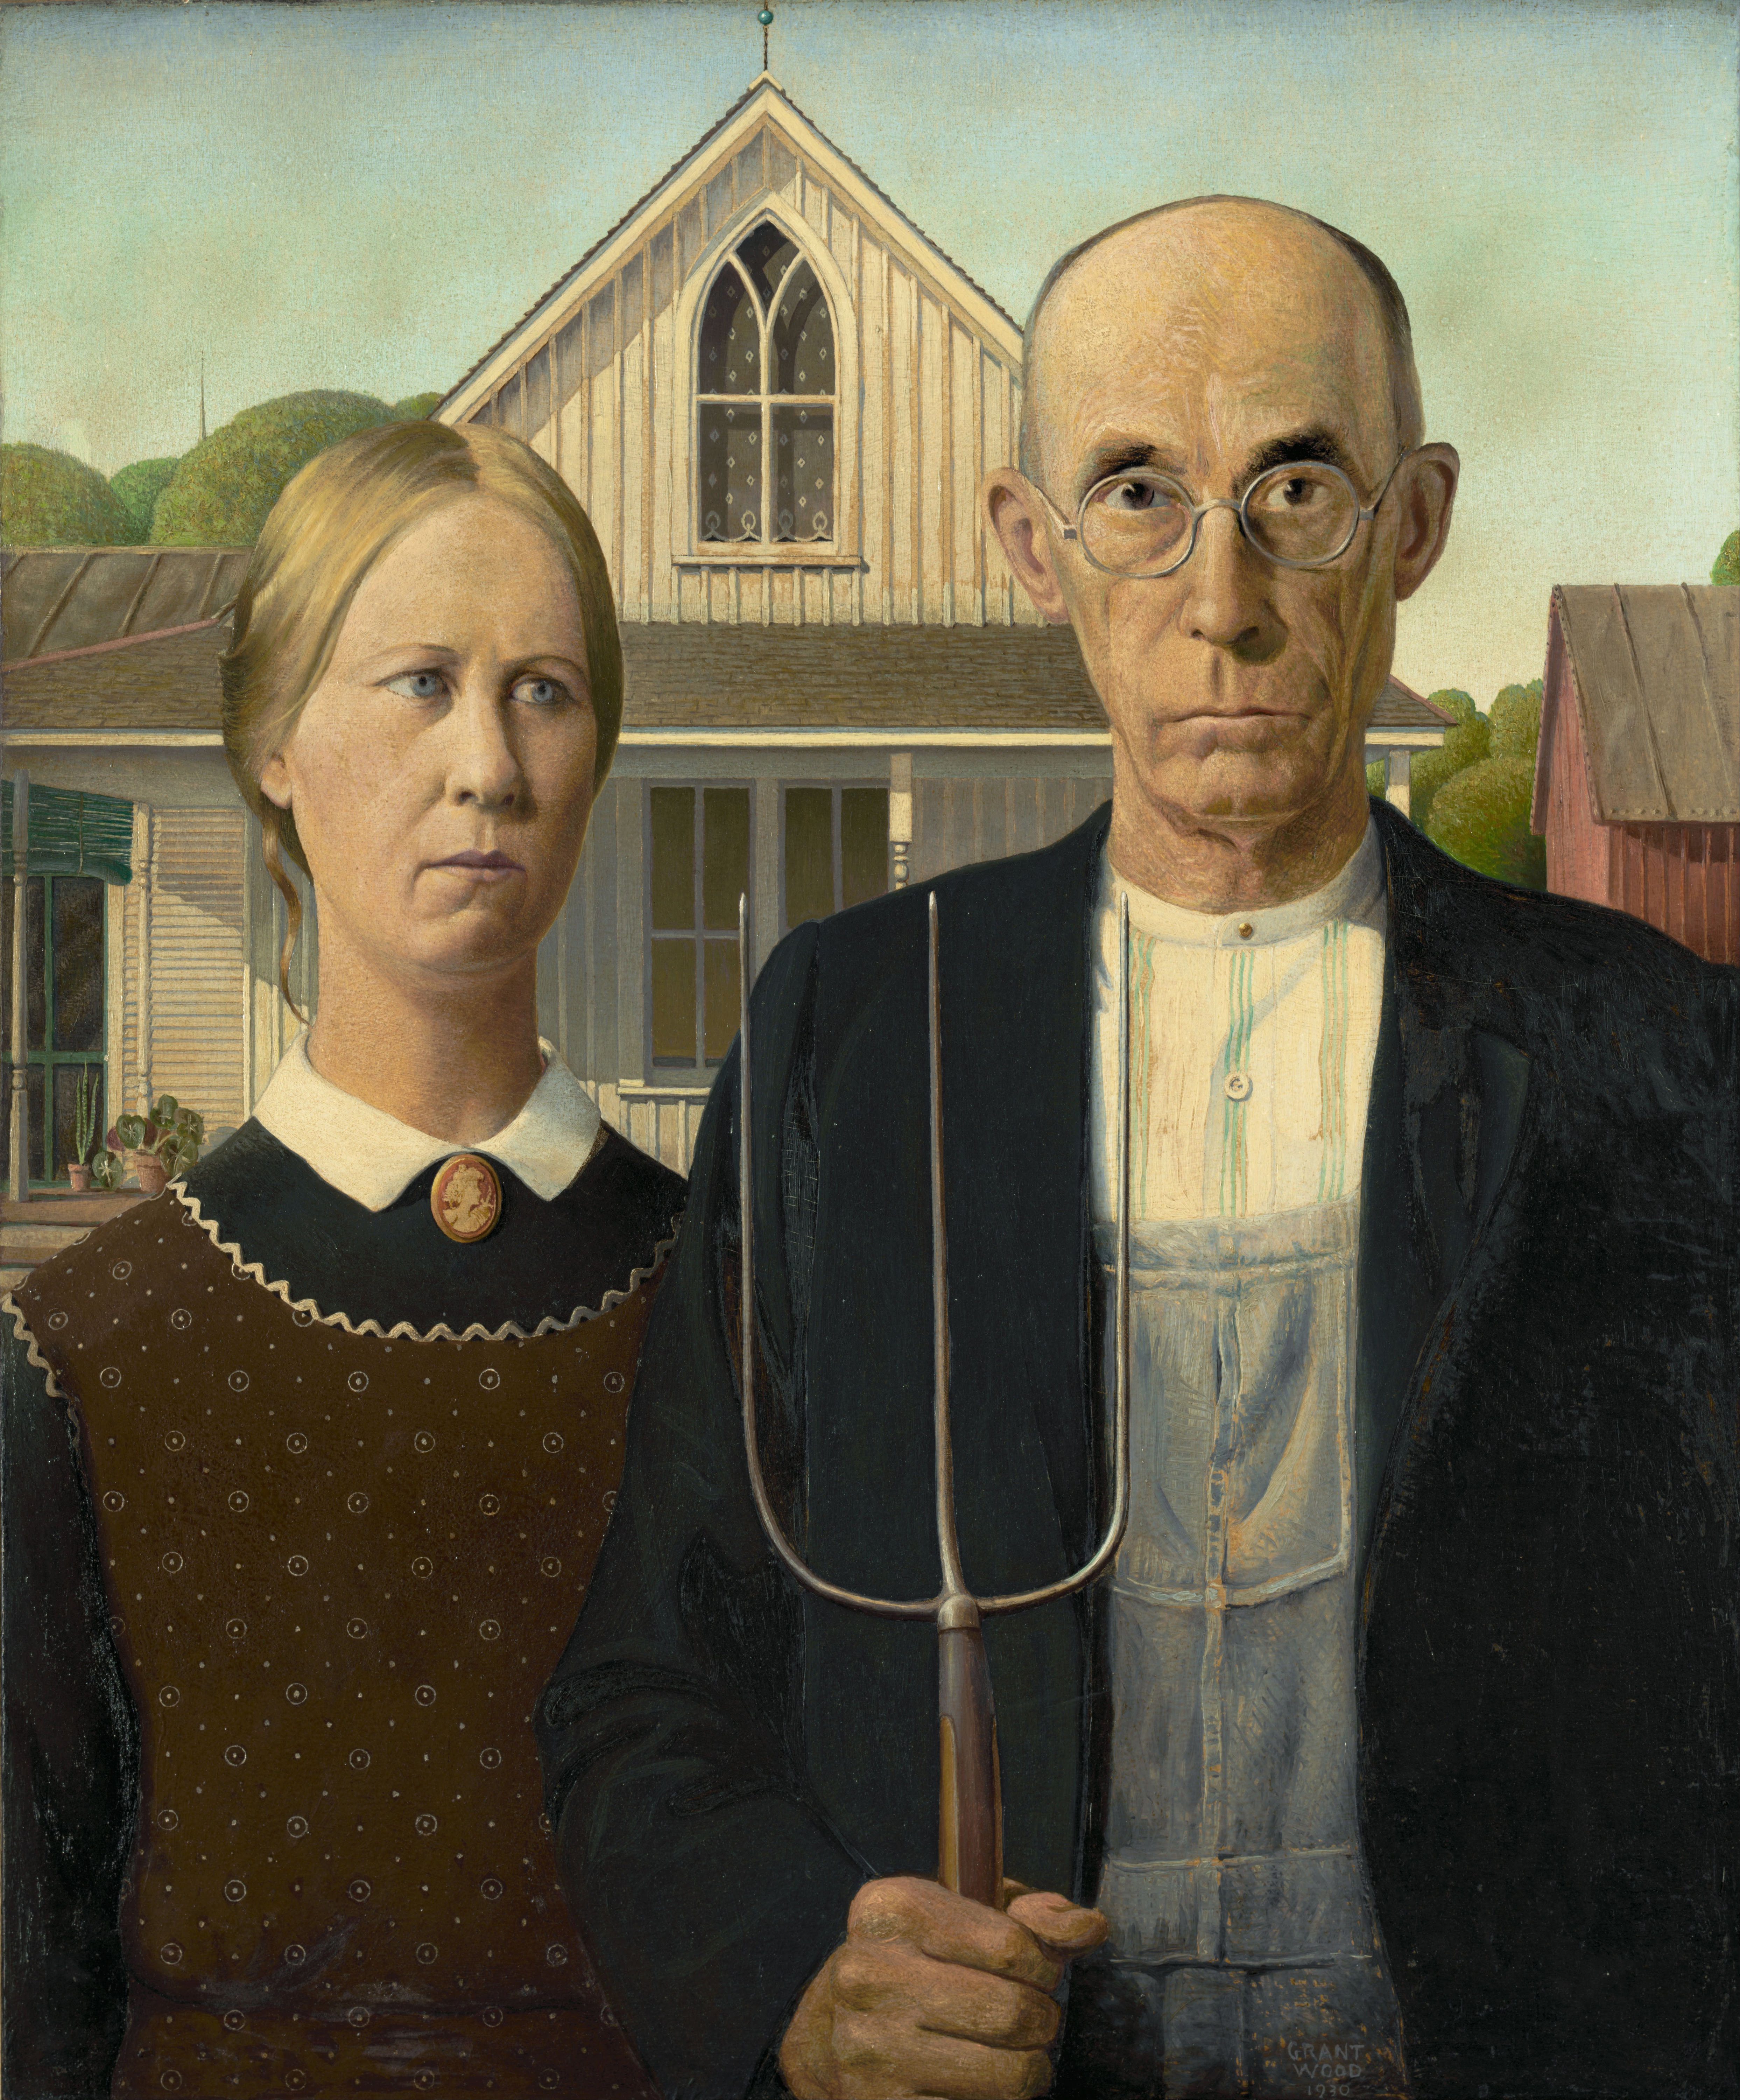 American Gothic by Grant Wood - 1930 - 78 × 65.3 cm Art Institute of Chicago